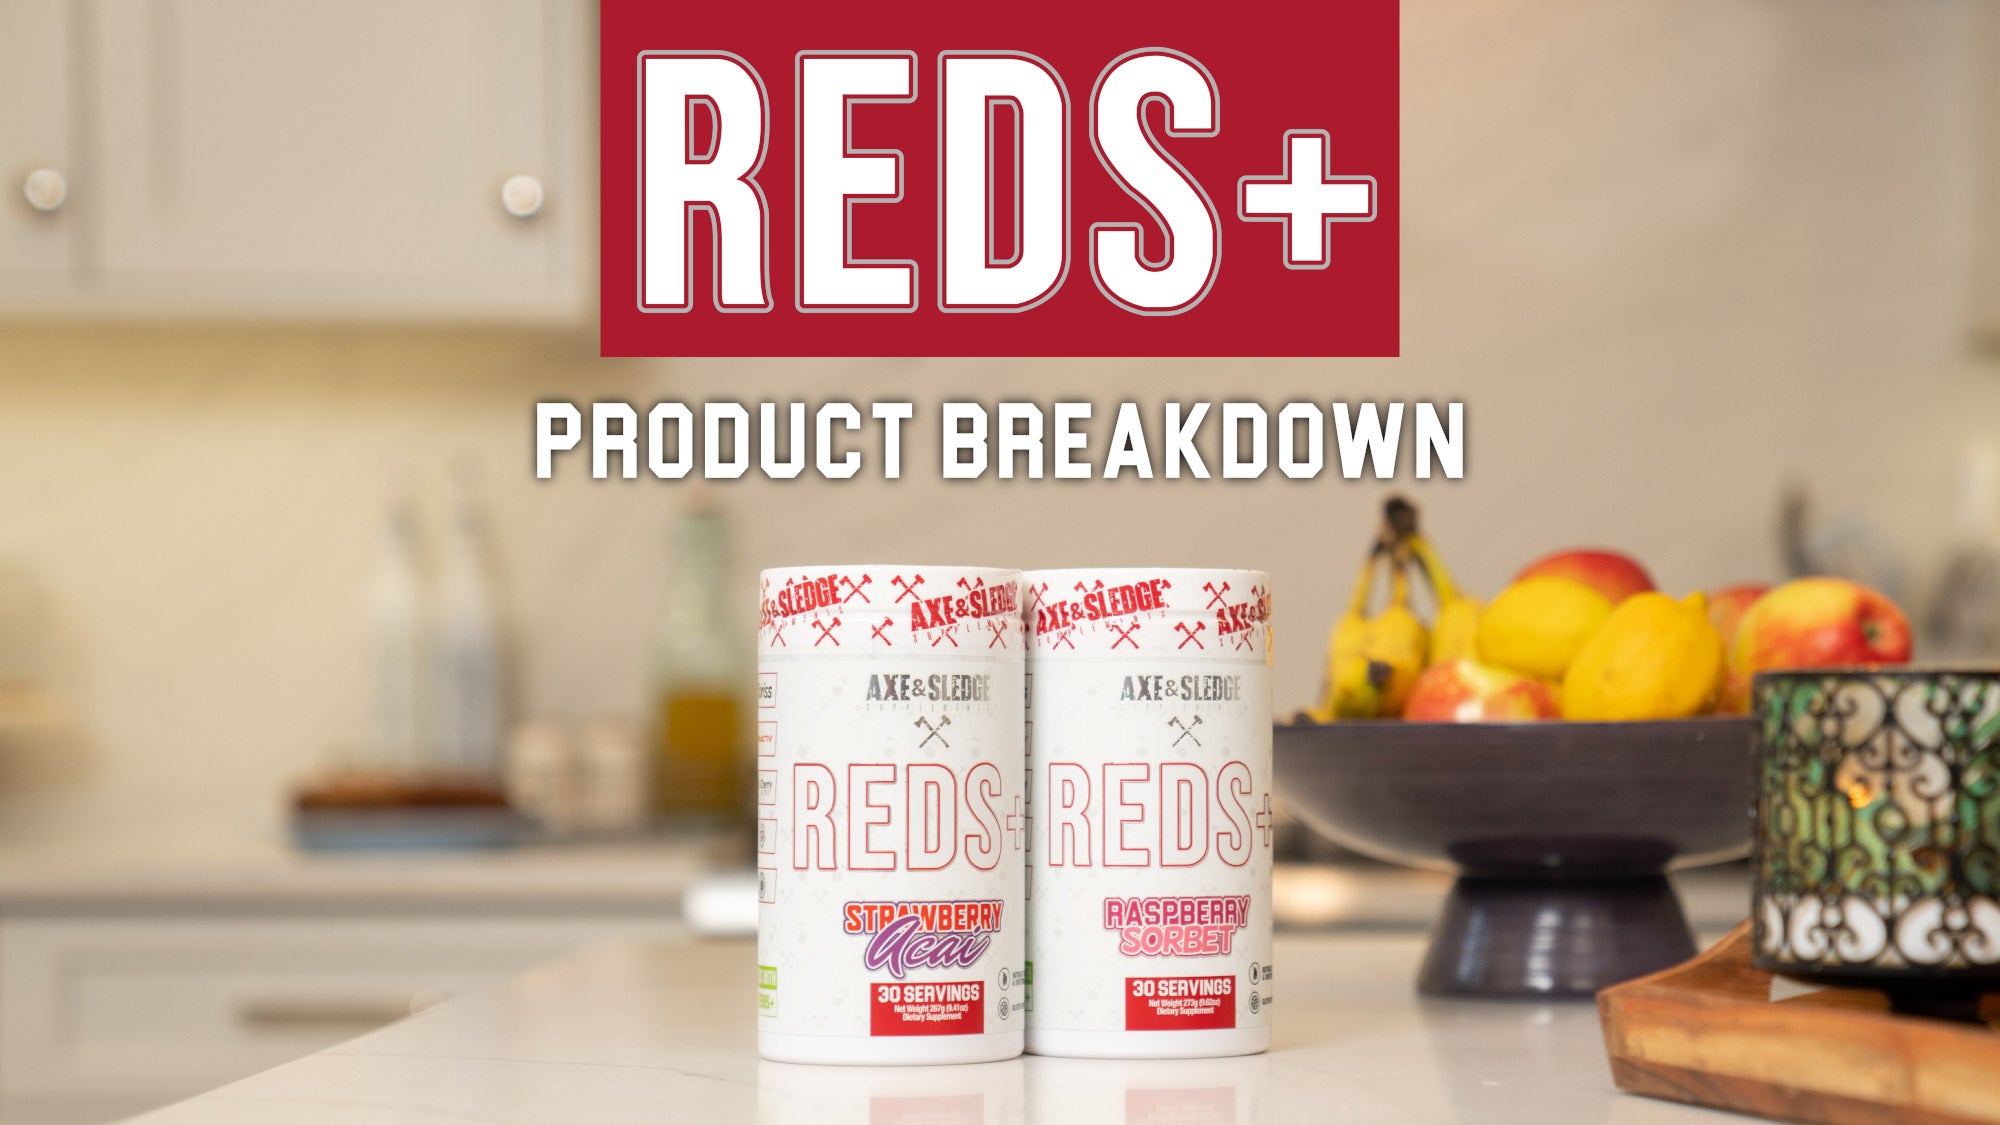 Reds+ Product Breakdown